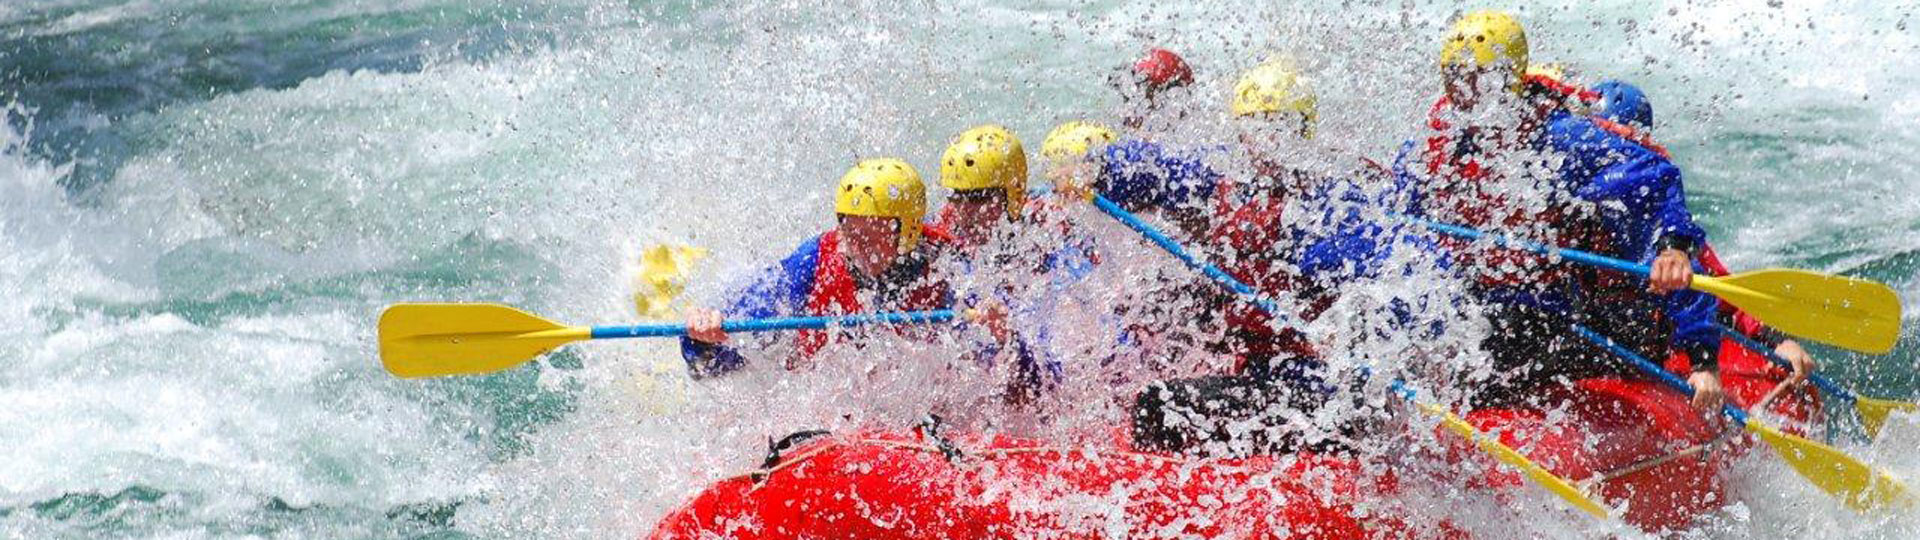 Extremo Sur - Rafting